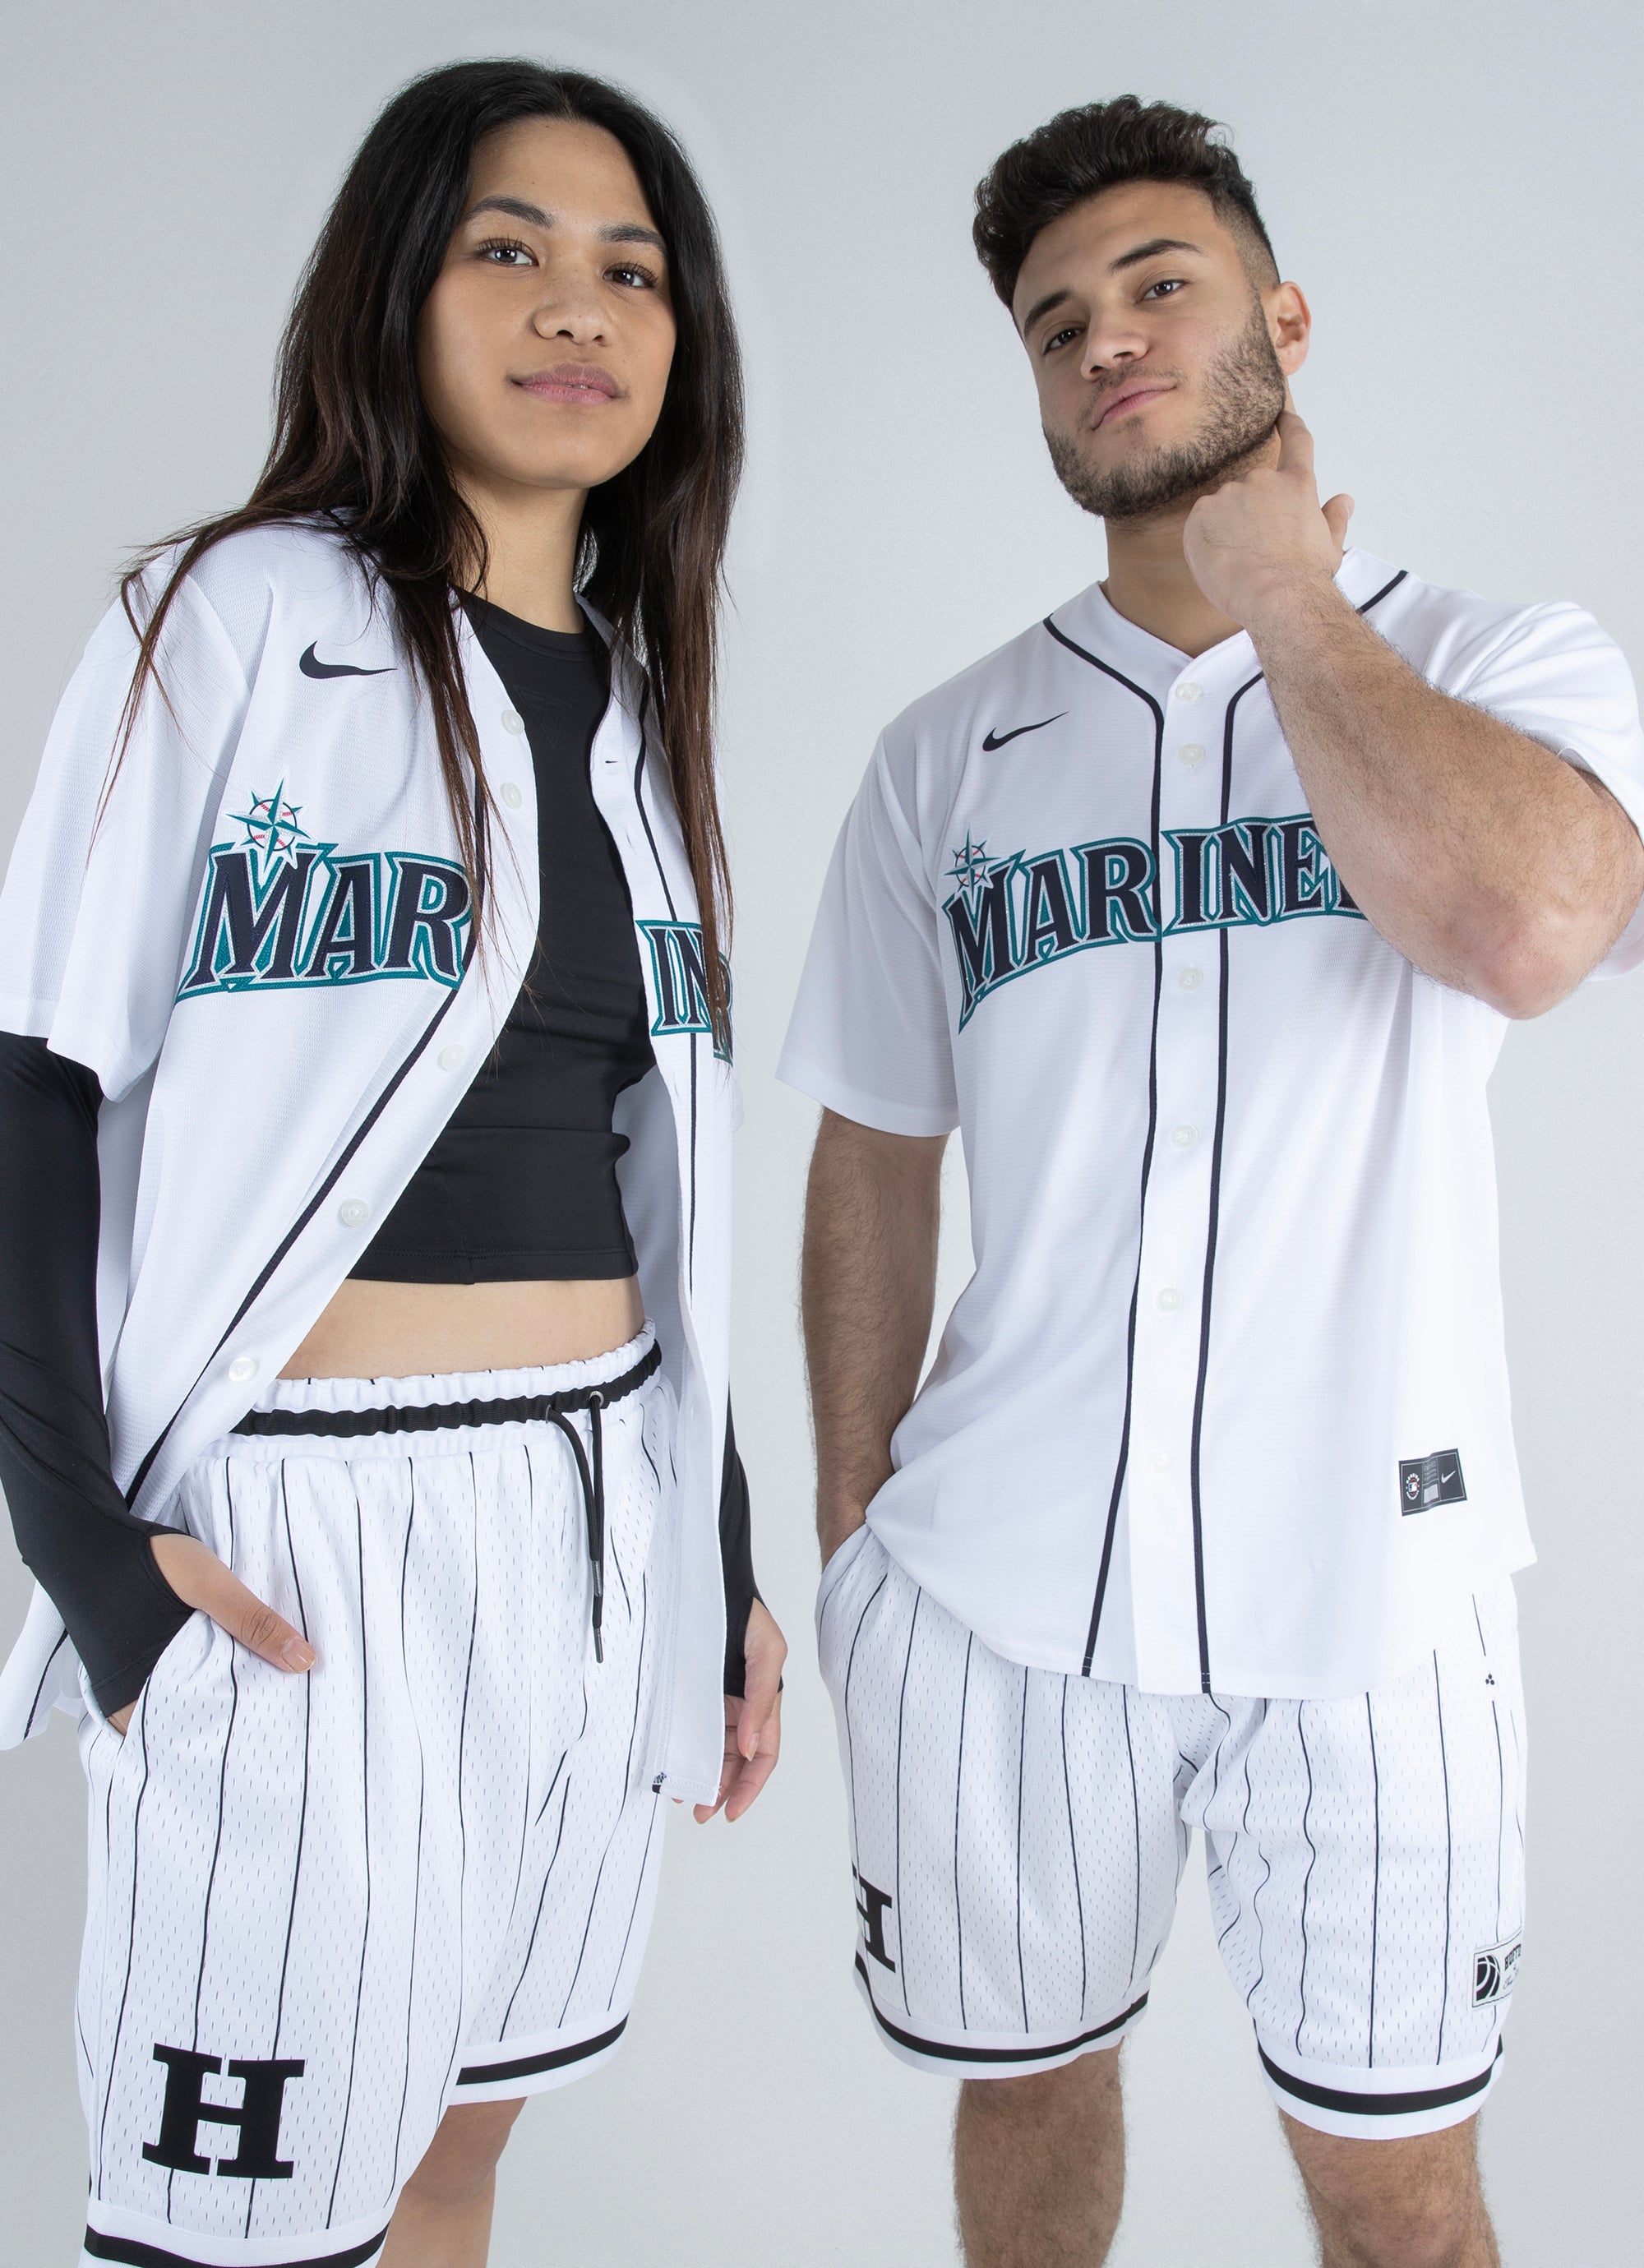 Nike X Mlb Seattle Mariners Official Replica Jersey in White